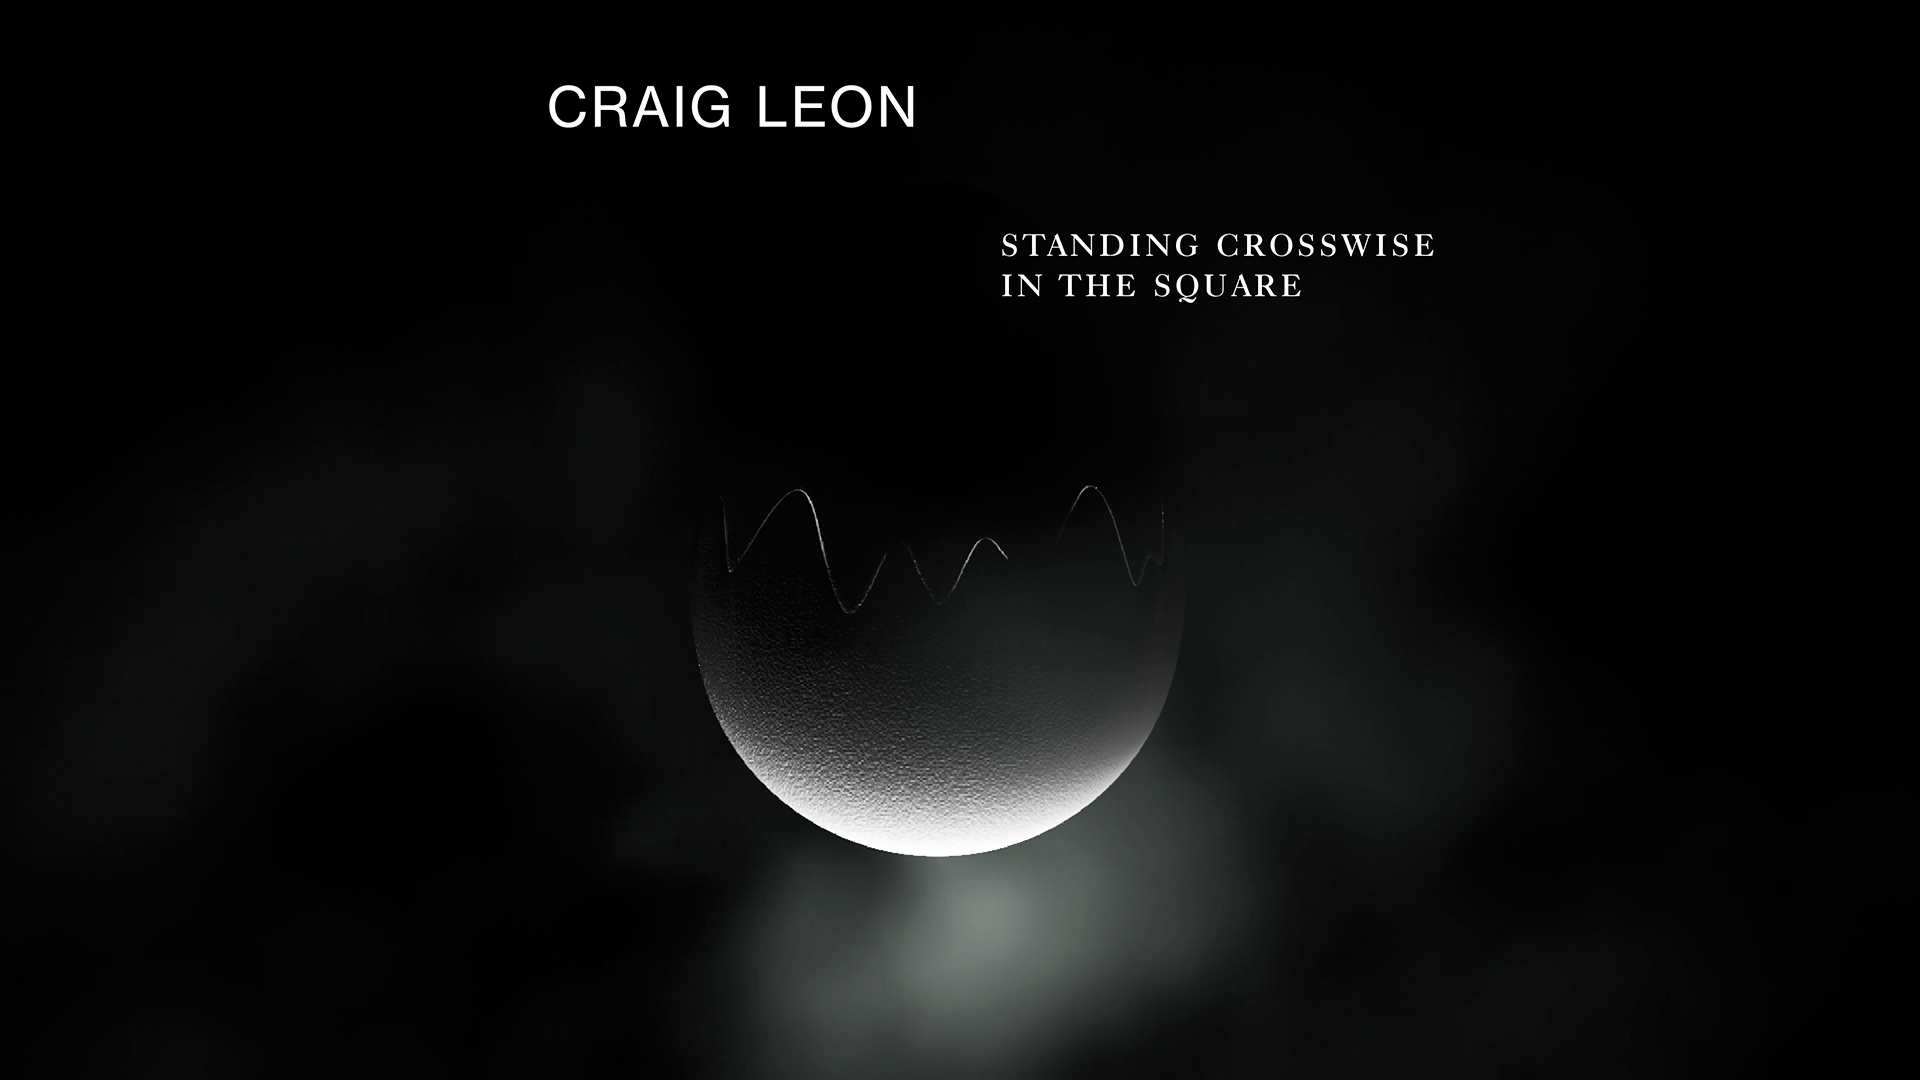 Link to Video for Craig Leon – Standing Crosswise In the Square